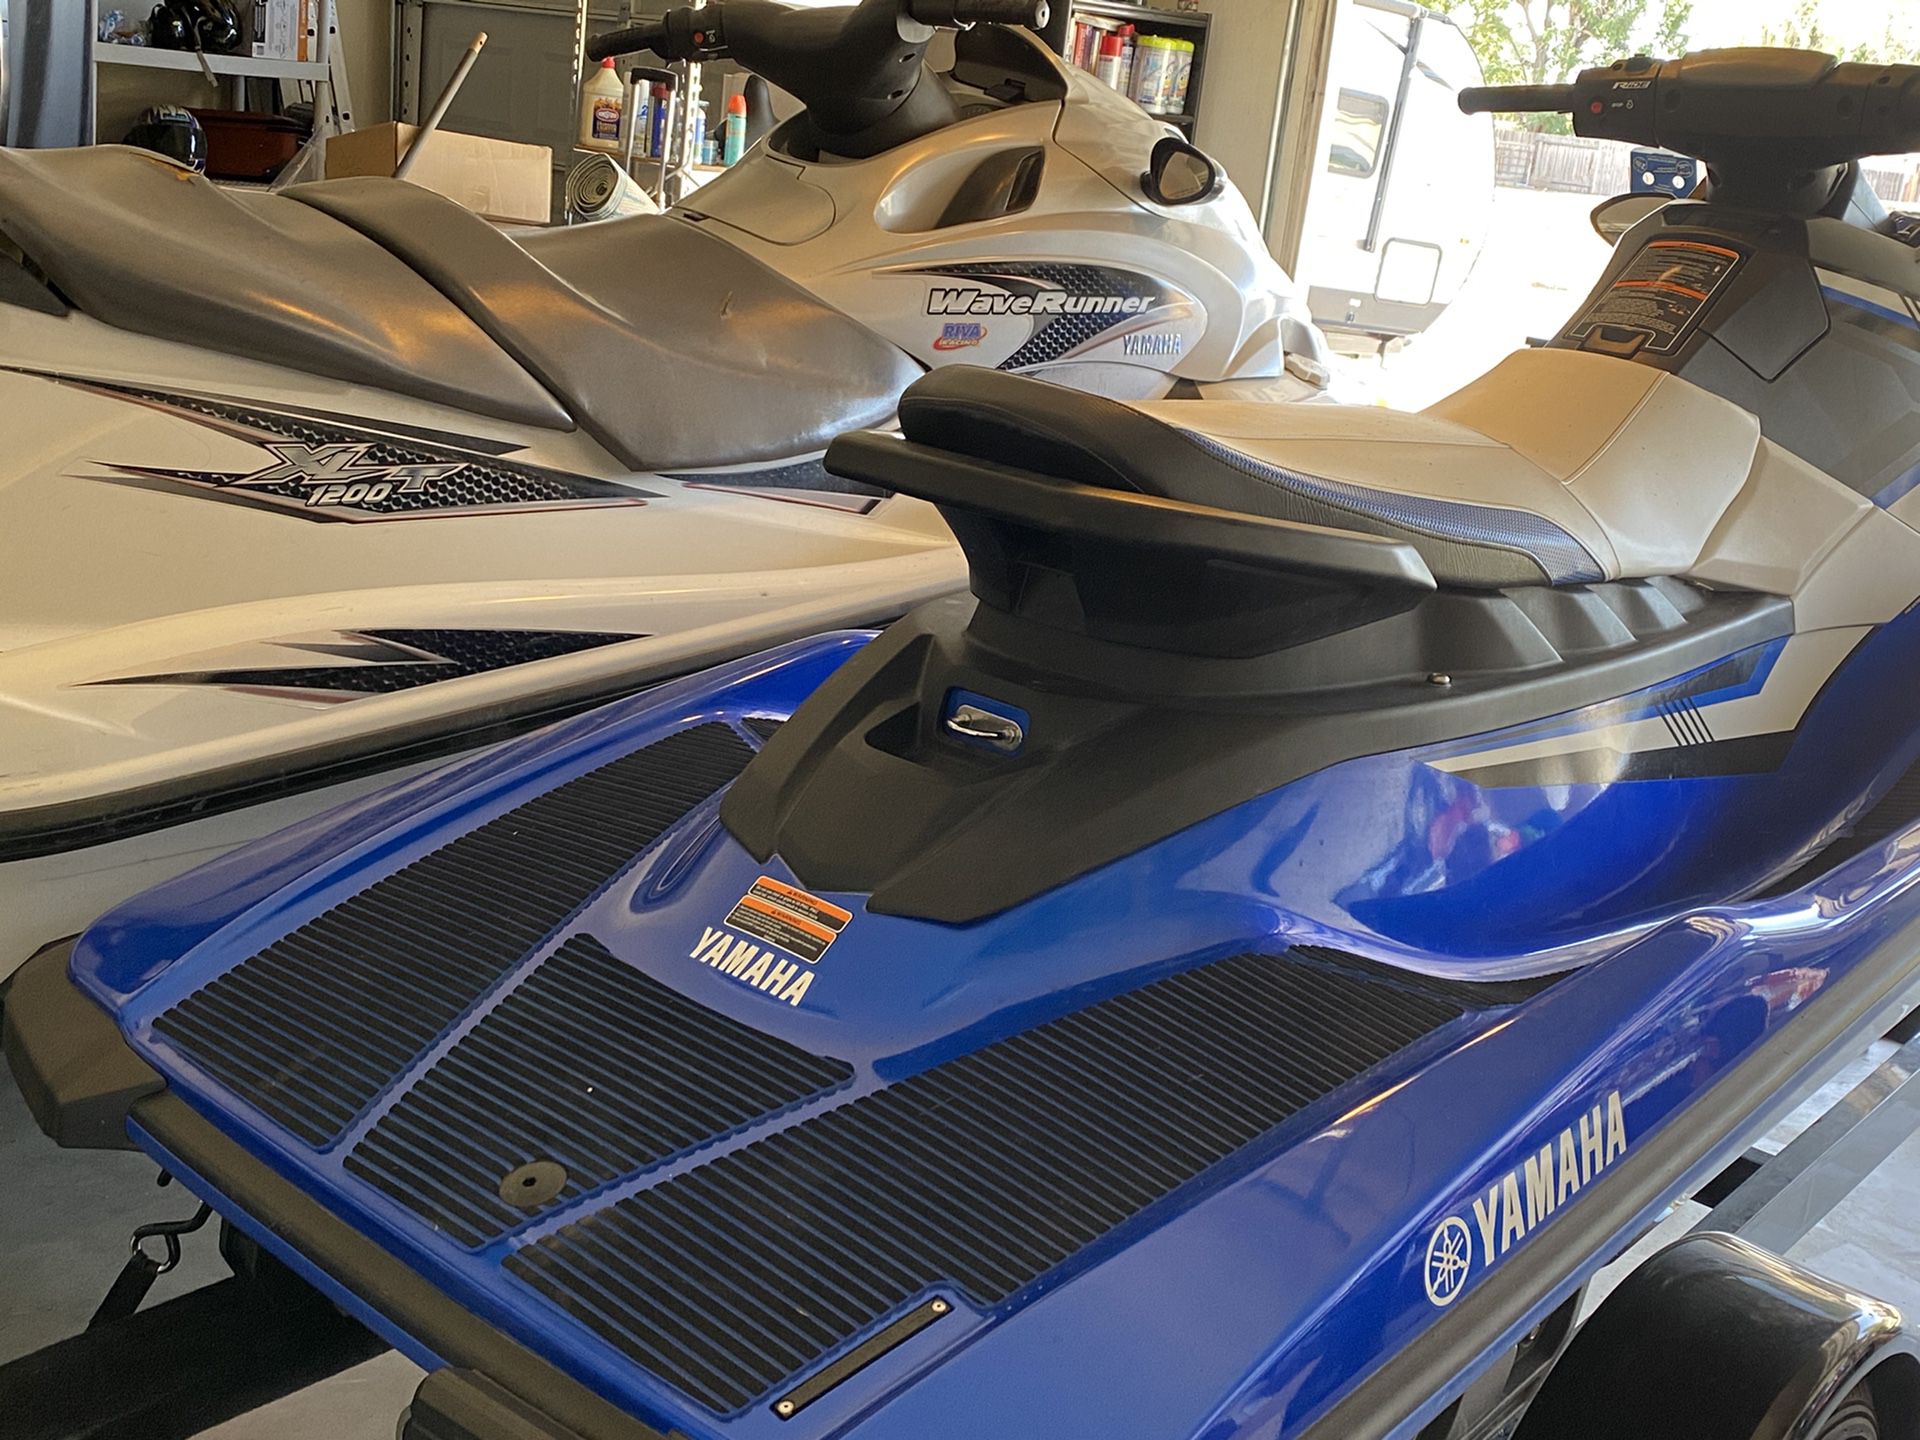 2001 and 2017 Yamaha 1200 Waverunner and 2017 EX Deluxe